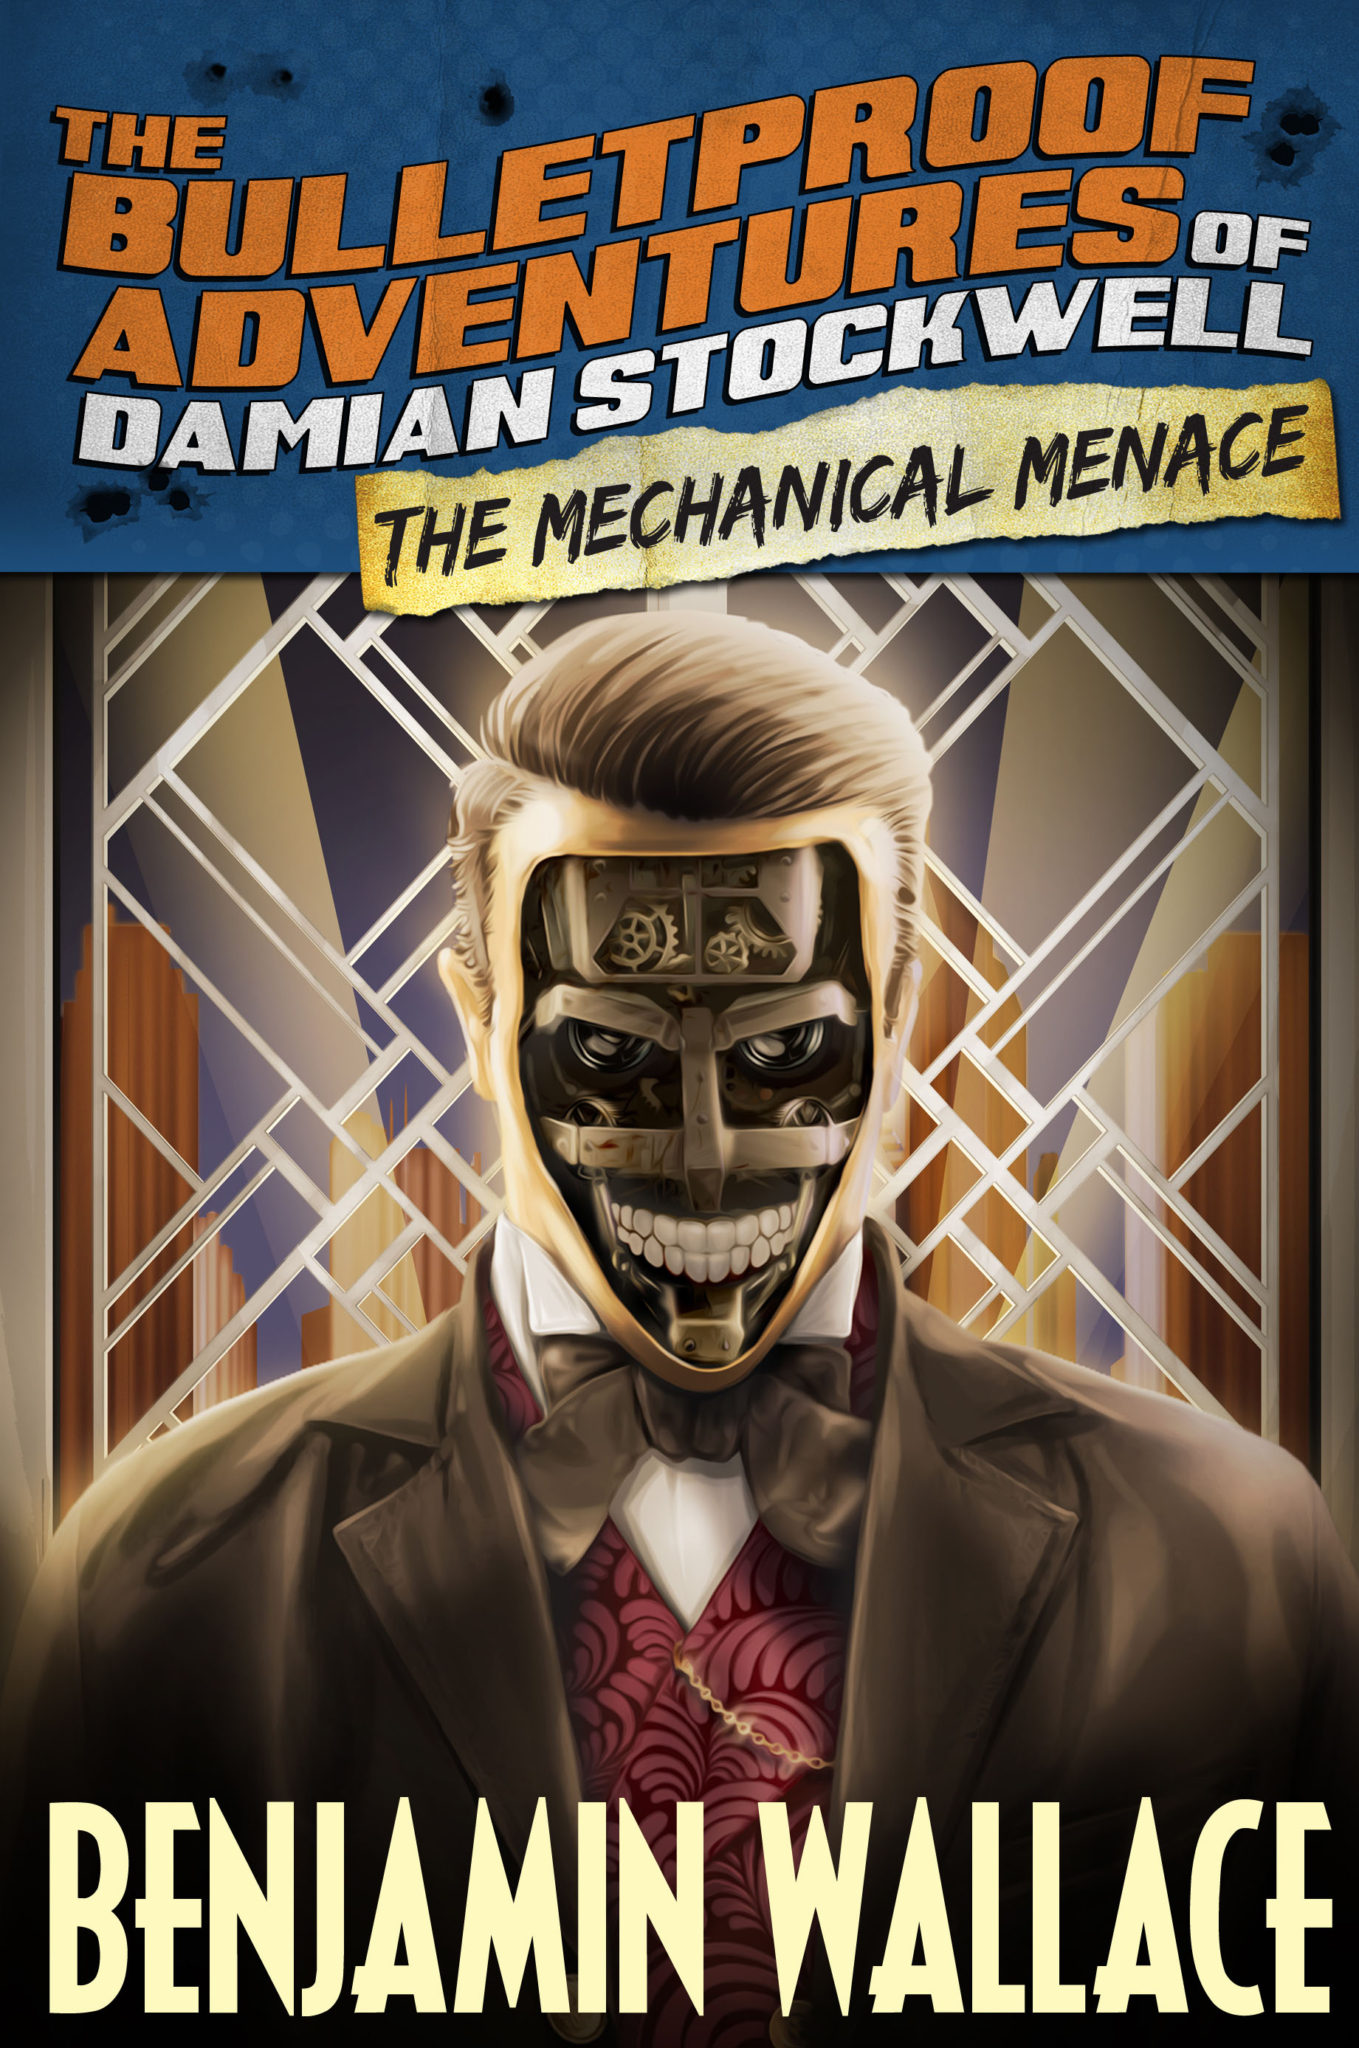 FREE: The Mechanical Menace (The Bulletproof Adventures of Damian Stockwell) by Benjamin Wallace